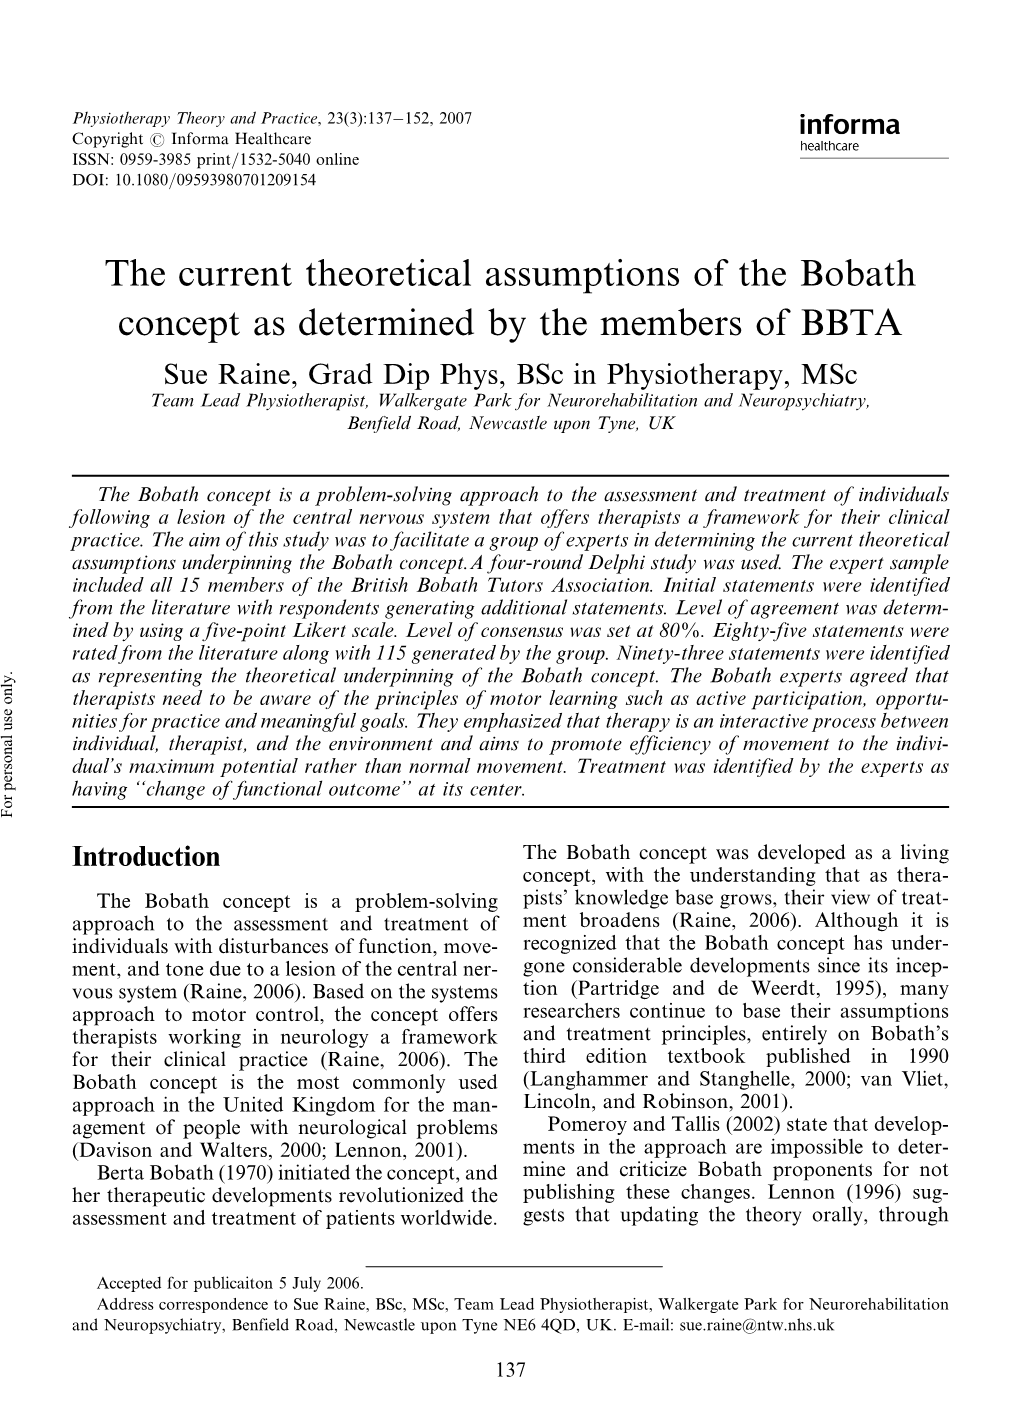 The Current Theoretical Assumptions of the Bobath Concept As Determined